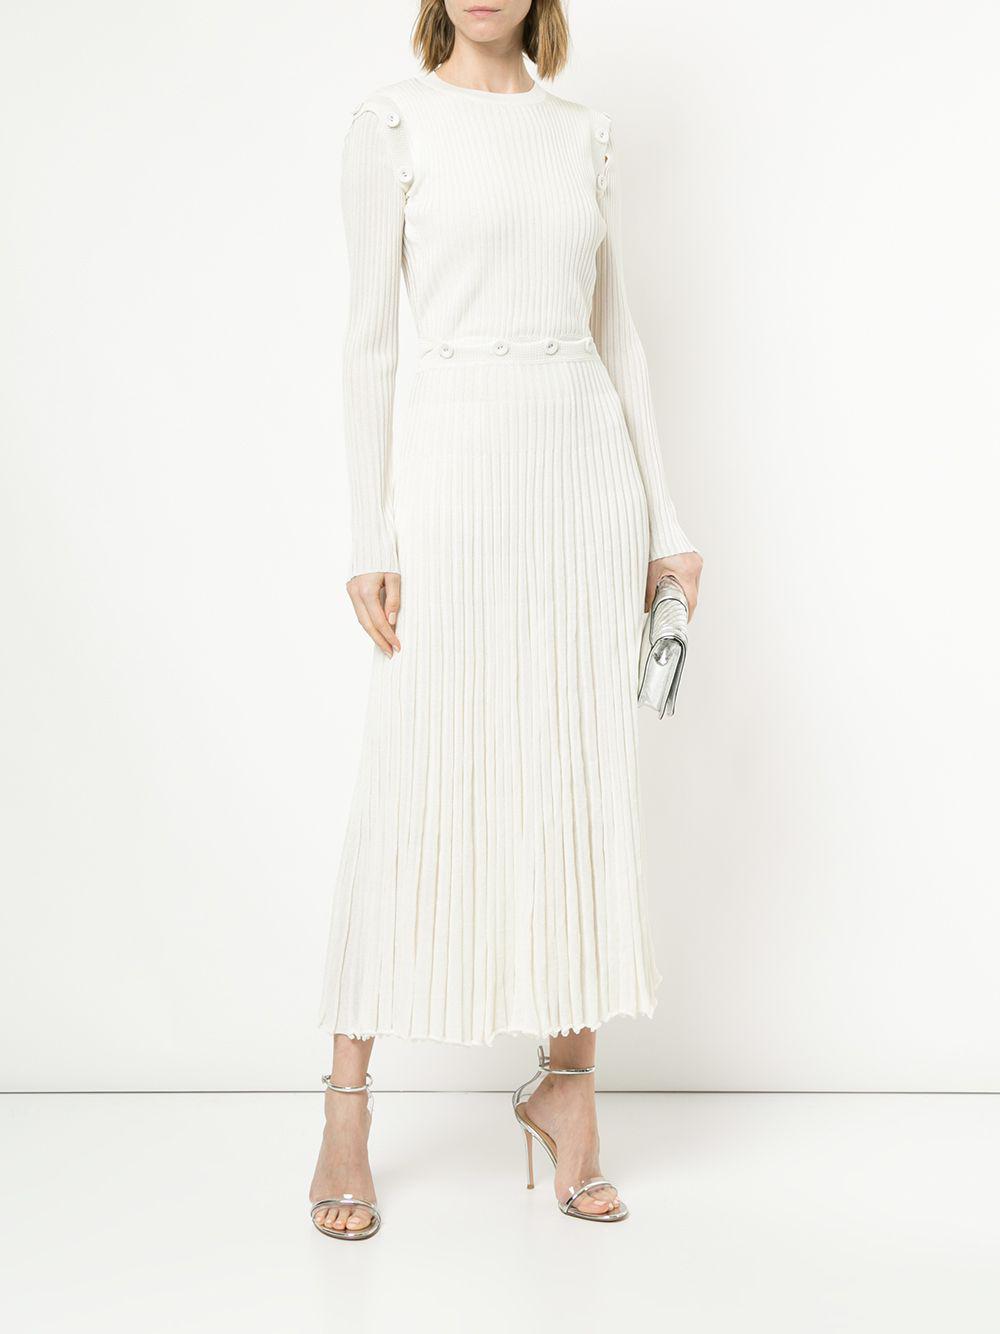 Christopher Esber Synthetic Pleated Knit Dress in White - Lyst